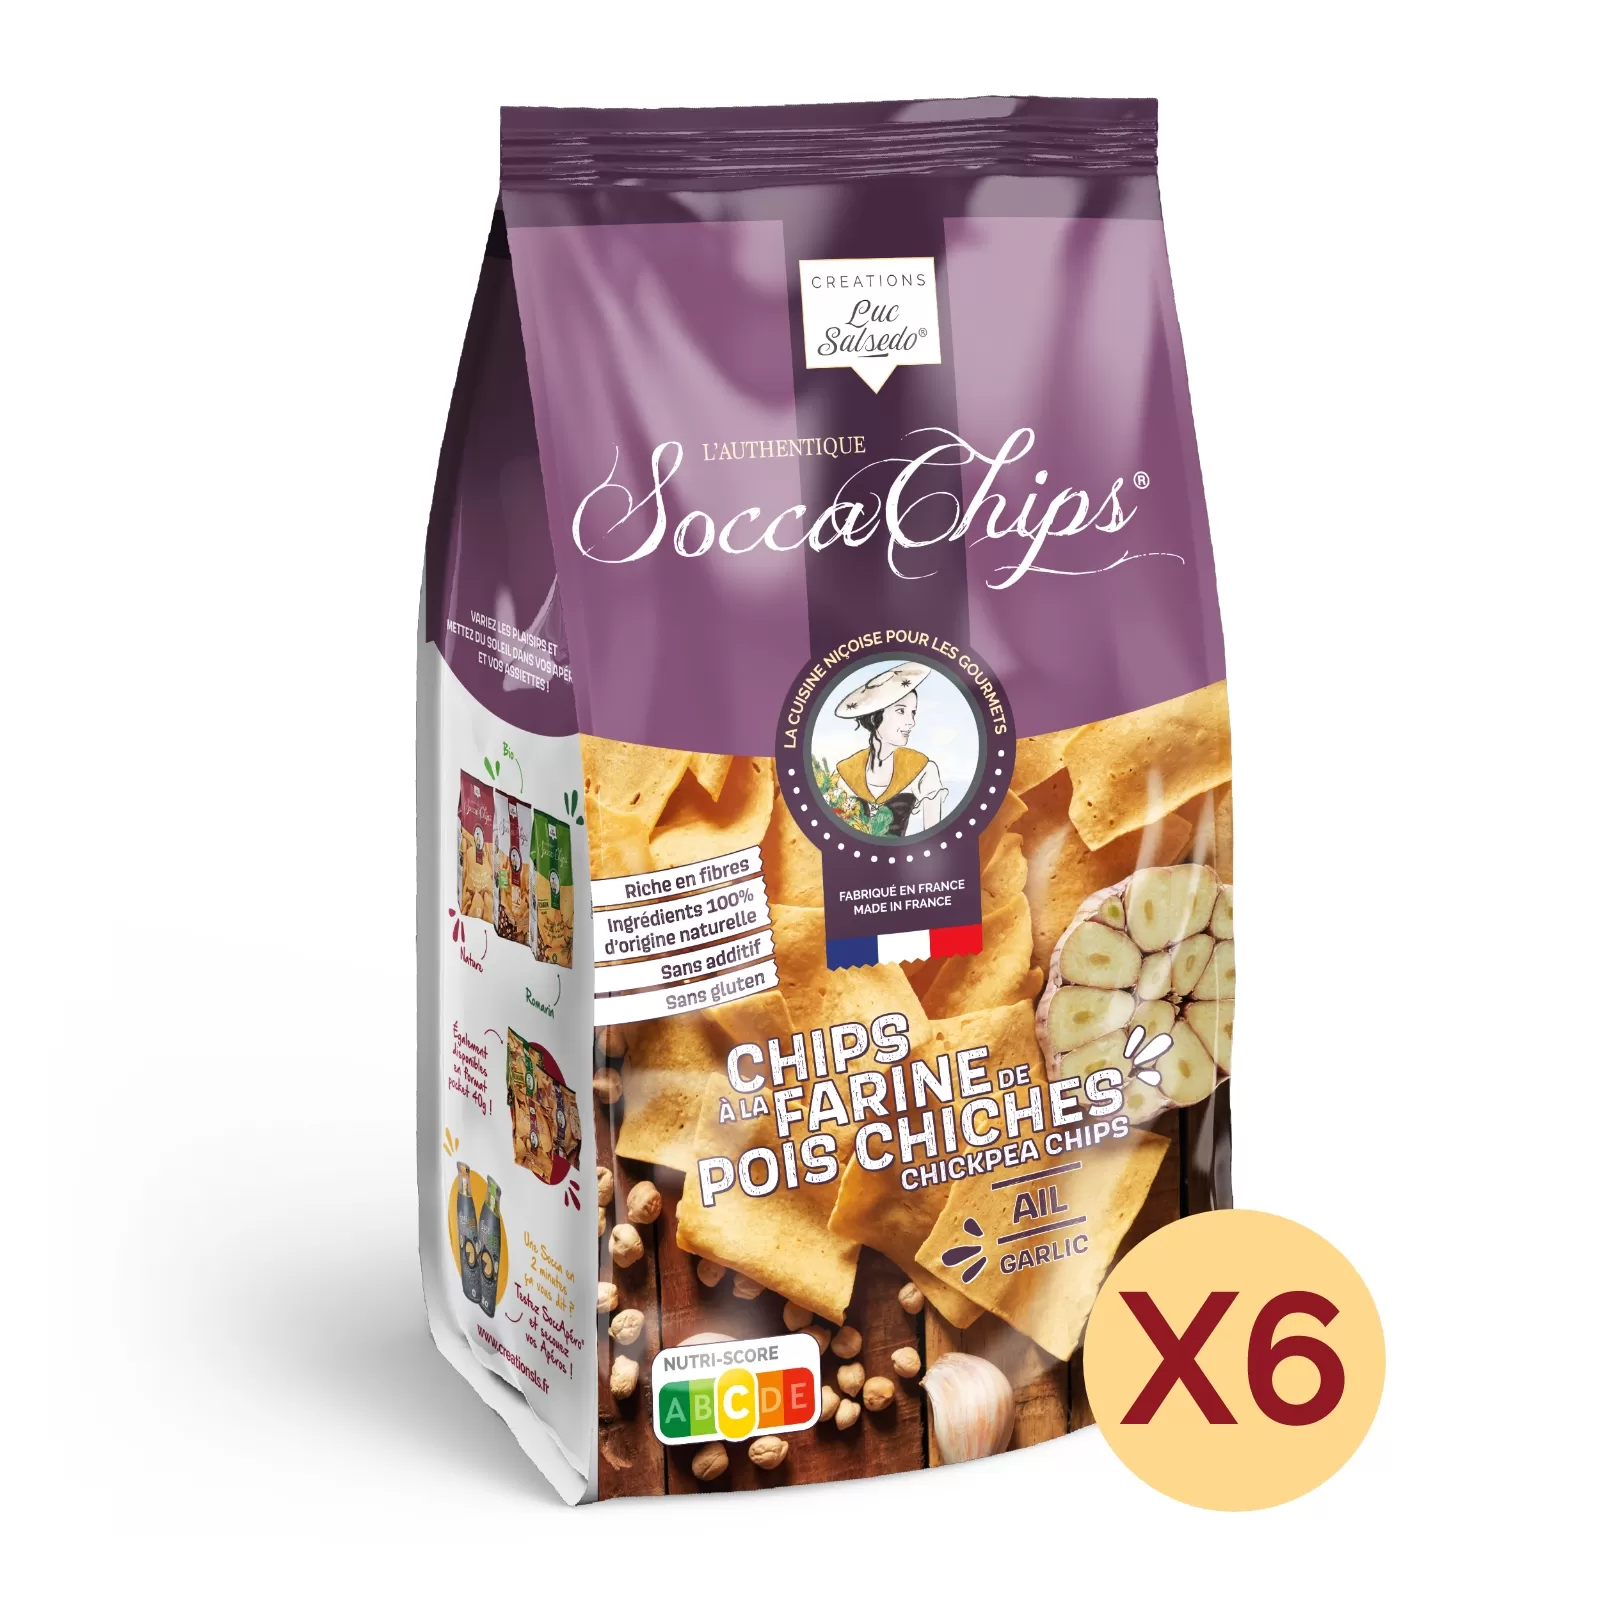 Socca Chips® AIL x6